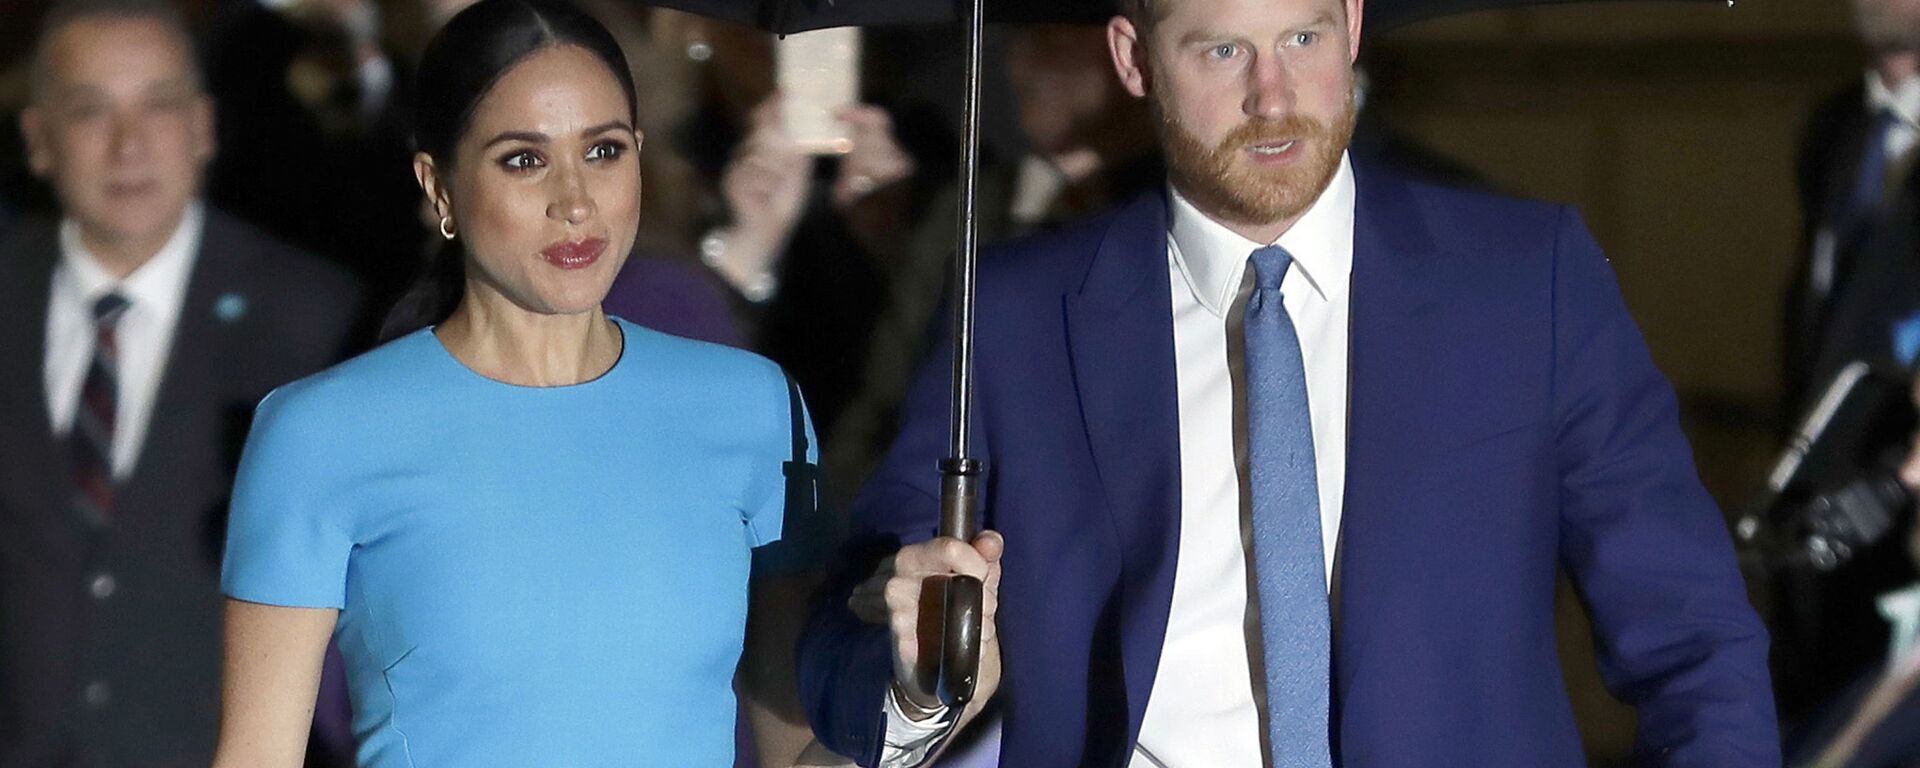 FILE - In this March 5, 2020, file photo, Britain's Prince Harry and Meghan, Duchess of Sussex, arrive at the annual Endeavour Fund Awards in London - Sputnik International, 1920, 22.05.2021